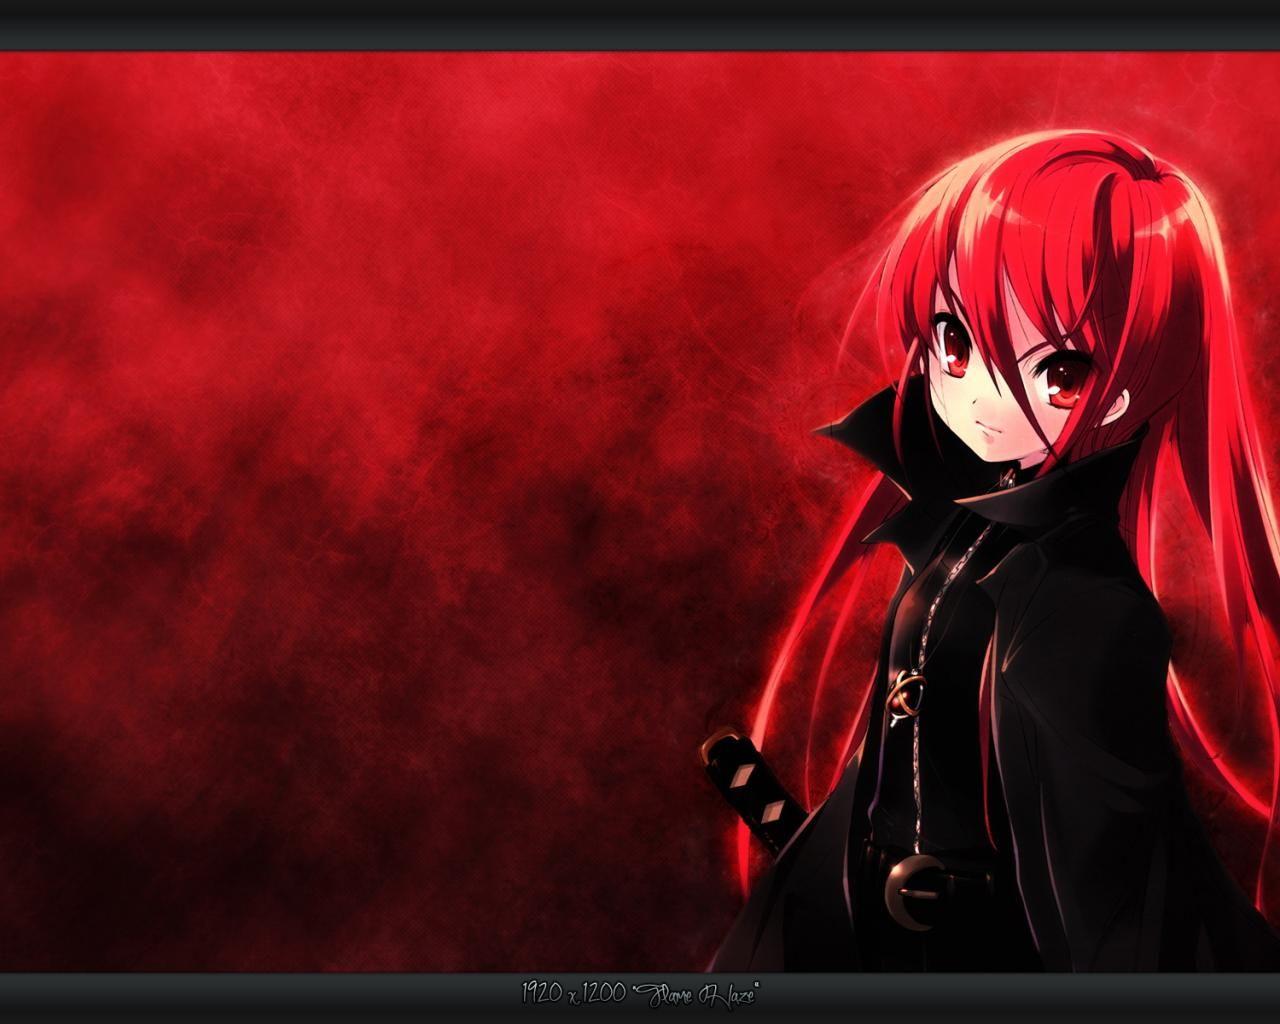 Red And Black Anime Girl Wallpapers Top Free Red And Black Anime Girl Backgrounds Wallpaperaccess